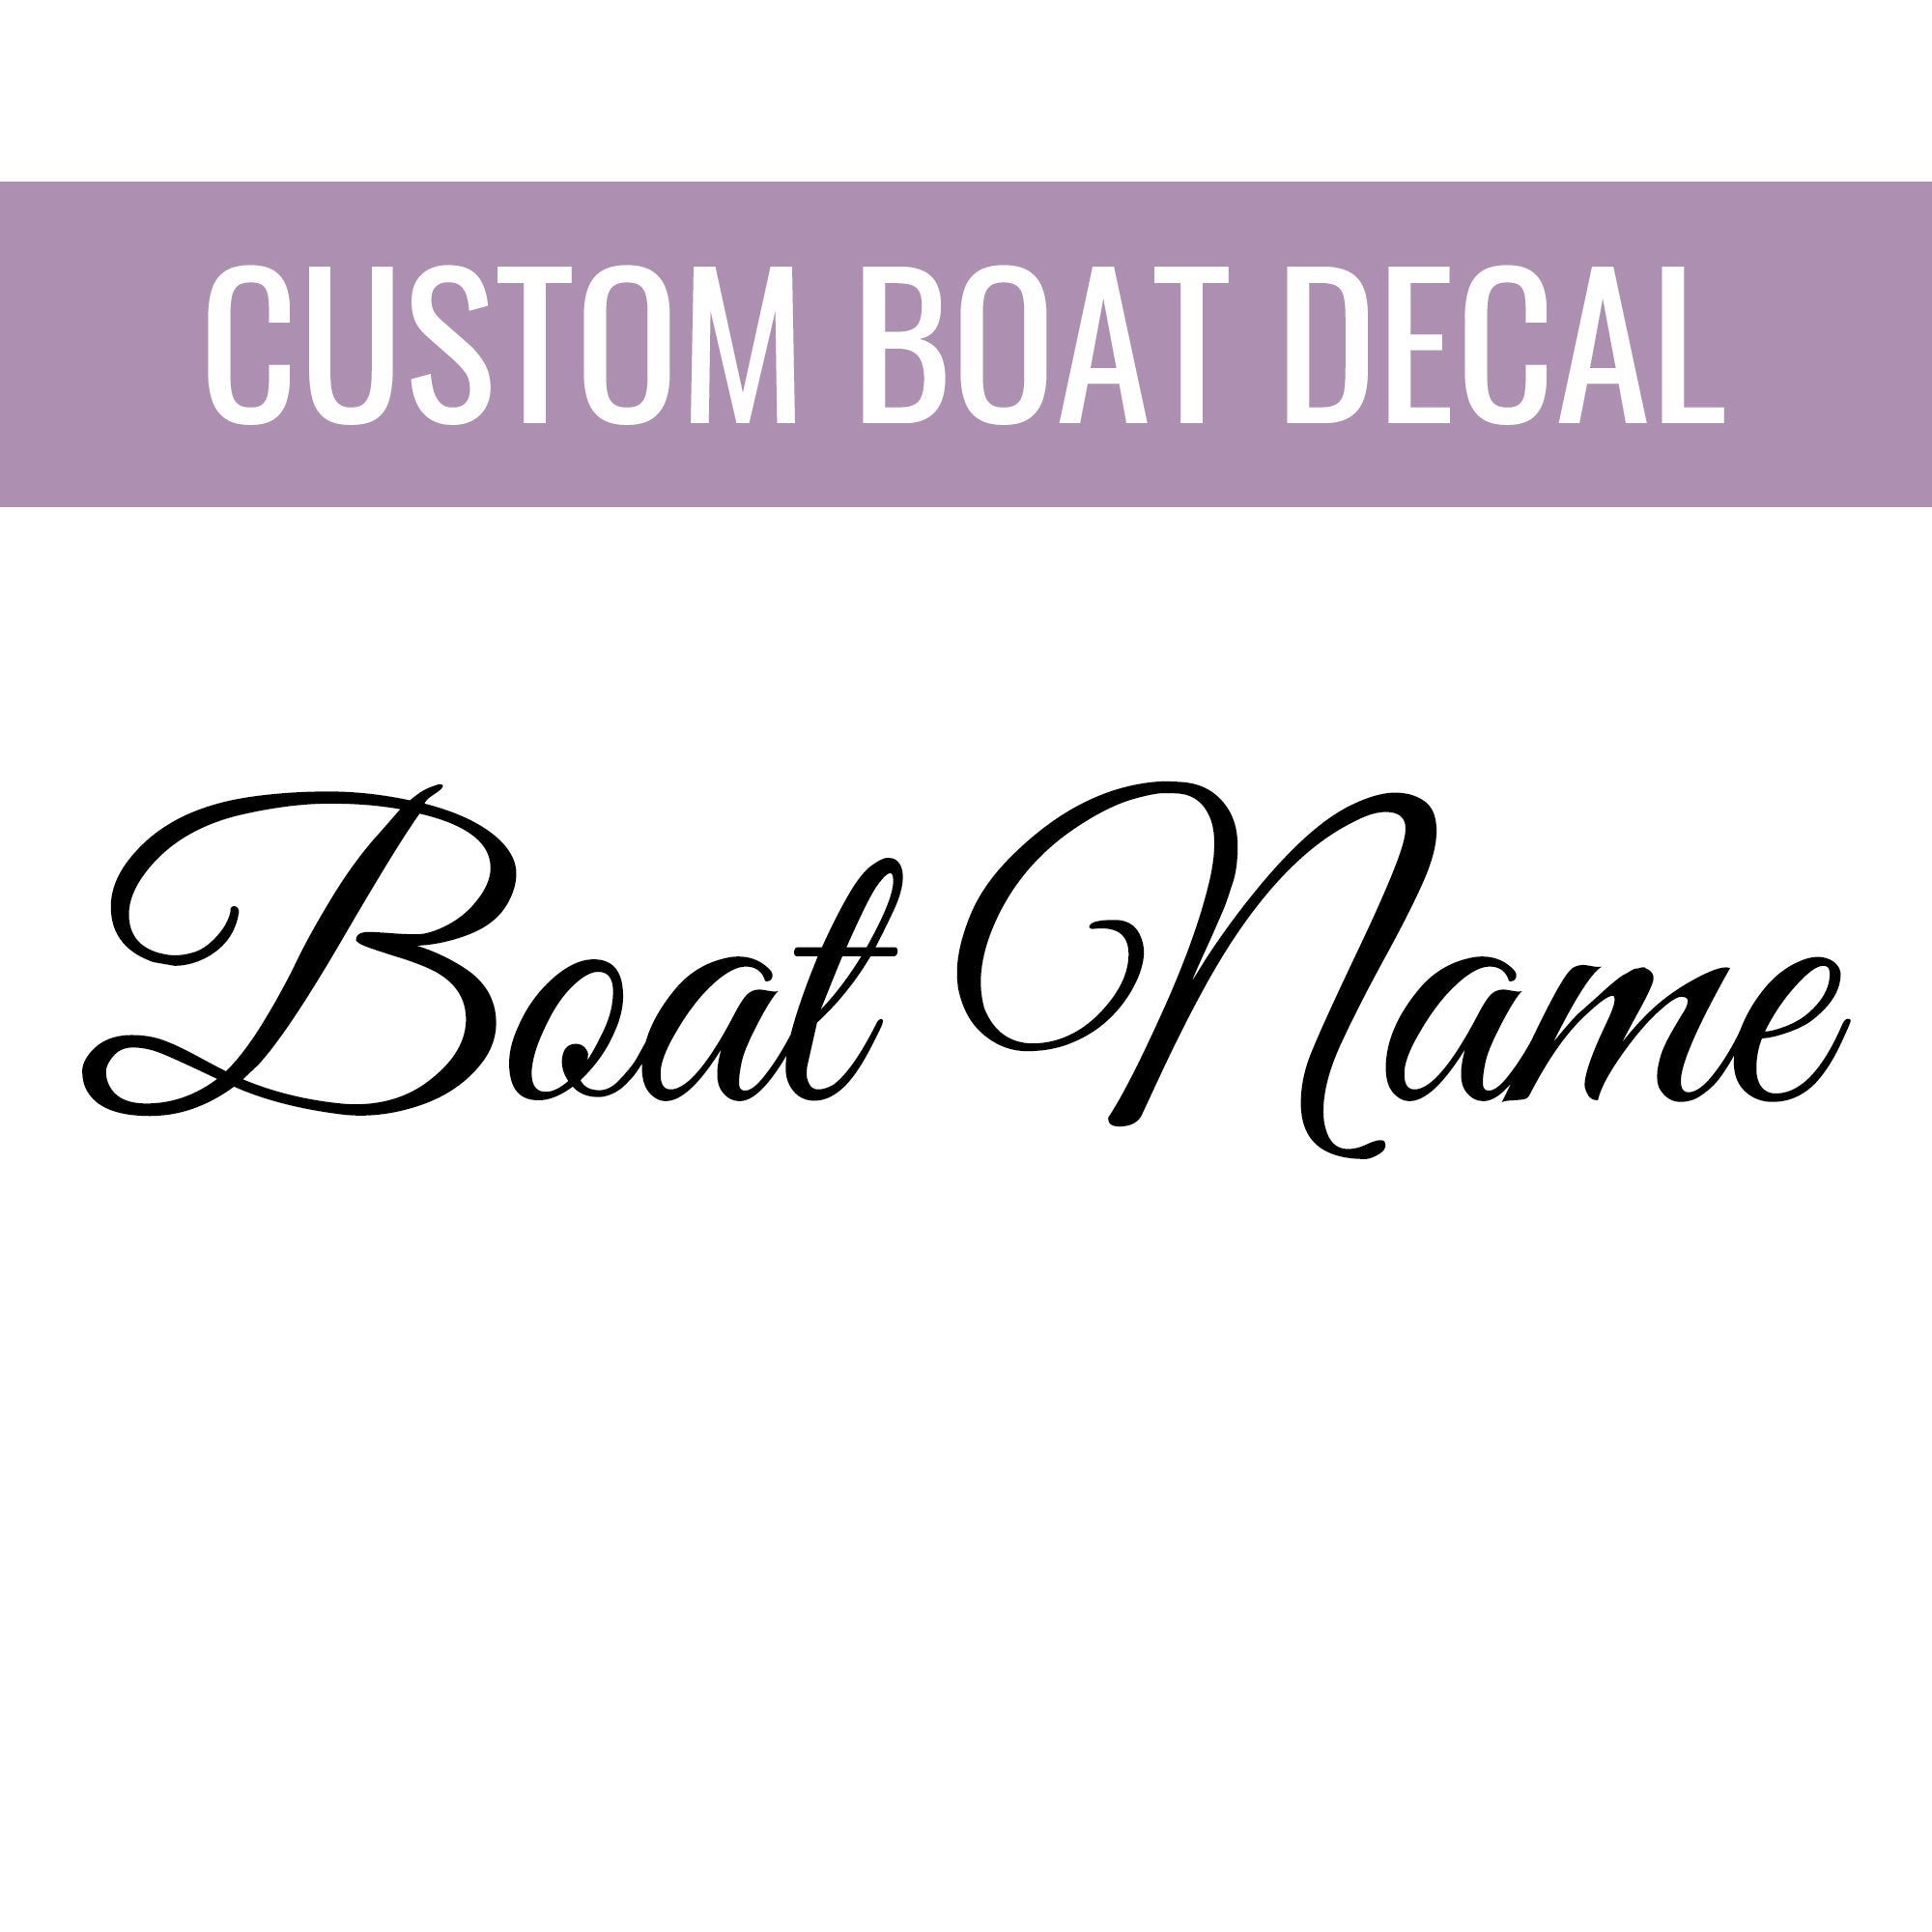 Personalized Boat Name Decal - Permanent Marine-Grade Vinyl Lettering for Yacht, Ship, Sailboat, Kayak, Canoe, Boat, Paddleboard, and More!